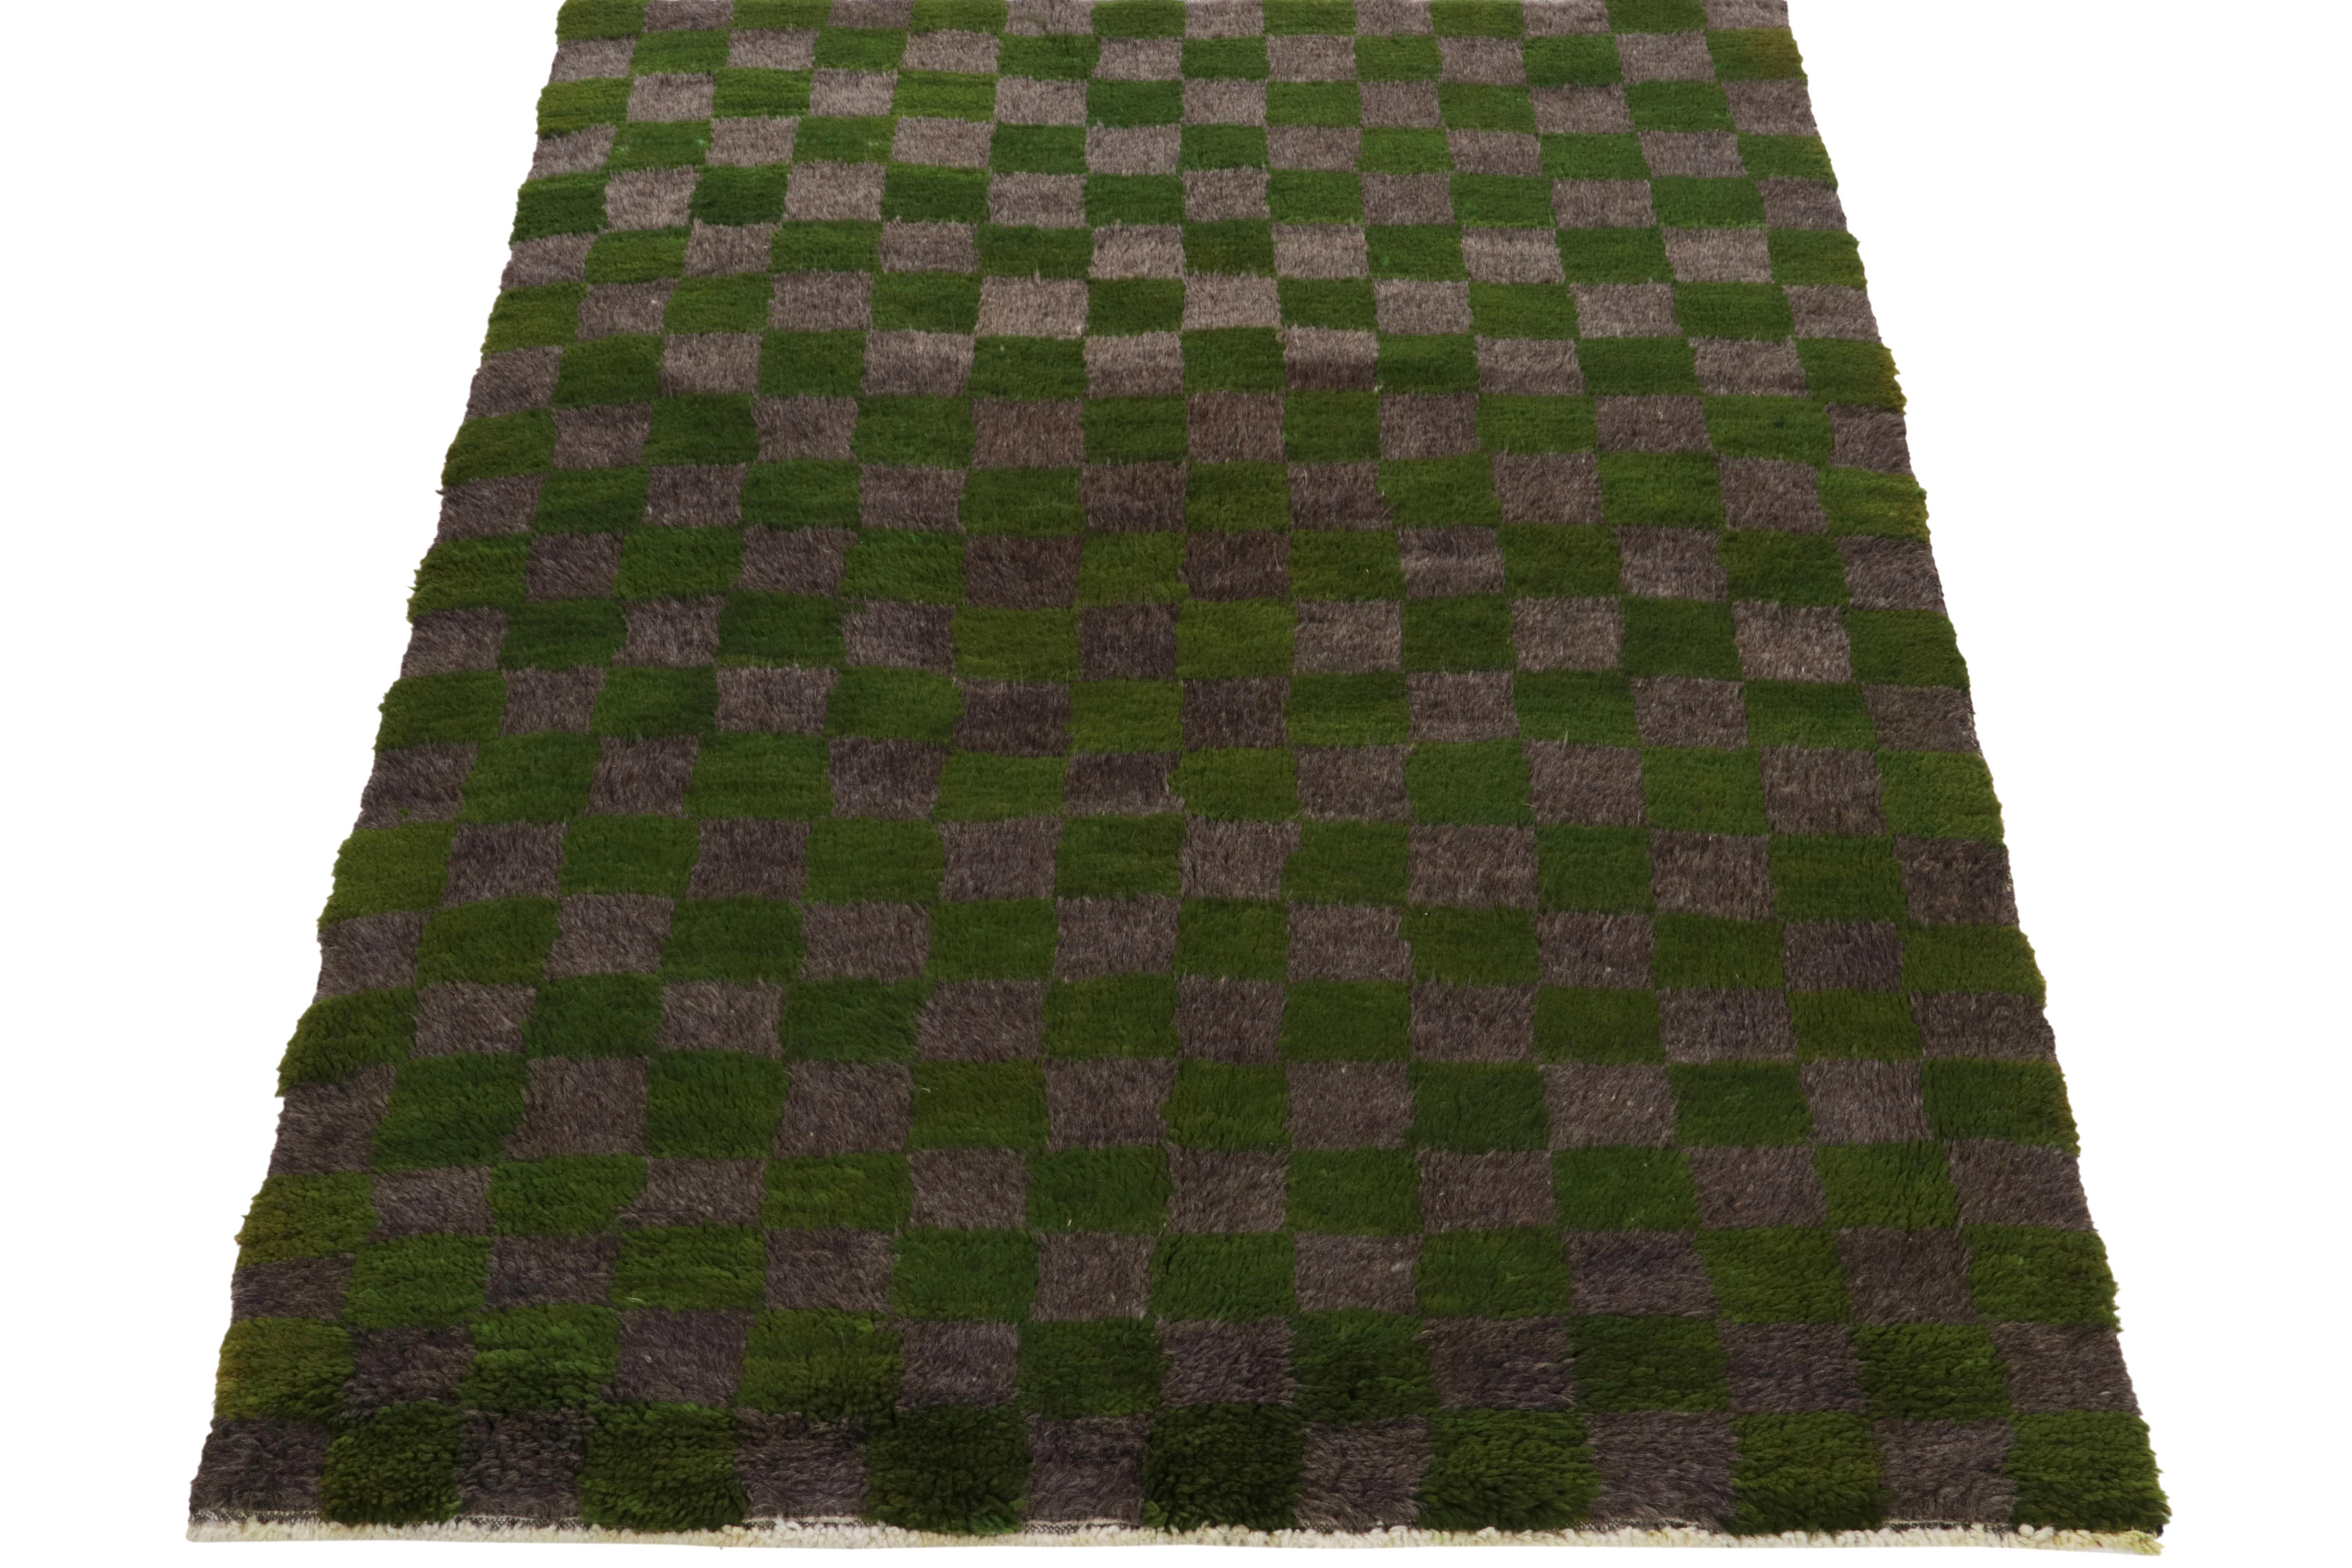 Hand-knotted in wool, a 4X6 vintage Tulu rug originating from Turkey circa 1950-1960, now joining Rug & Kilim’s Antique & Vintage collection. The healthy pile features a well defined checkered pattern in grass green & industrial grey for delicious